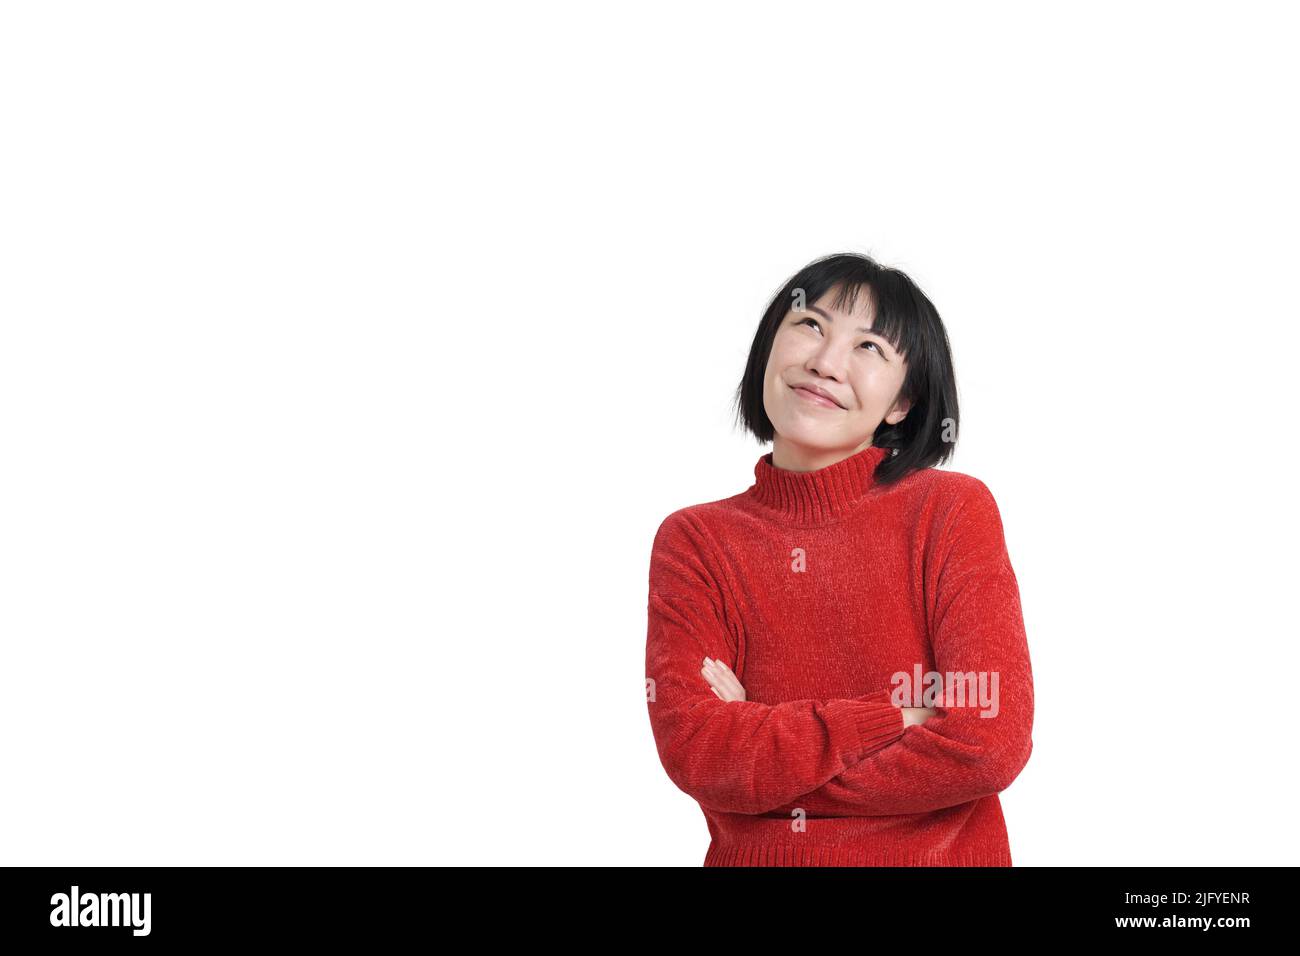 Young asian woman wearing red sweater smiling and thinking, isolated. Stock Photo